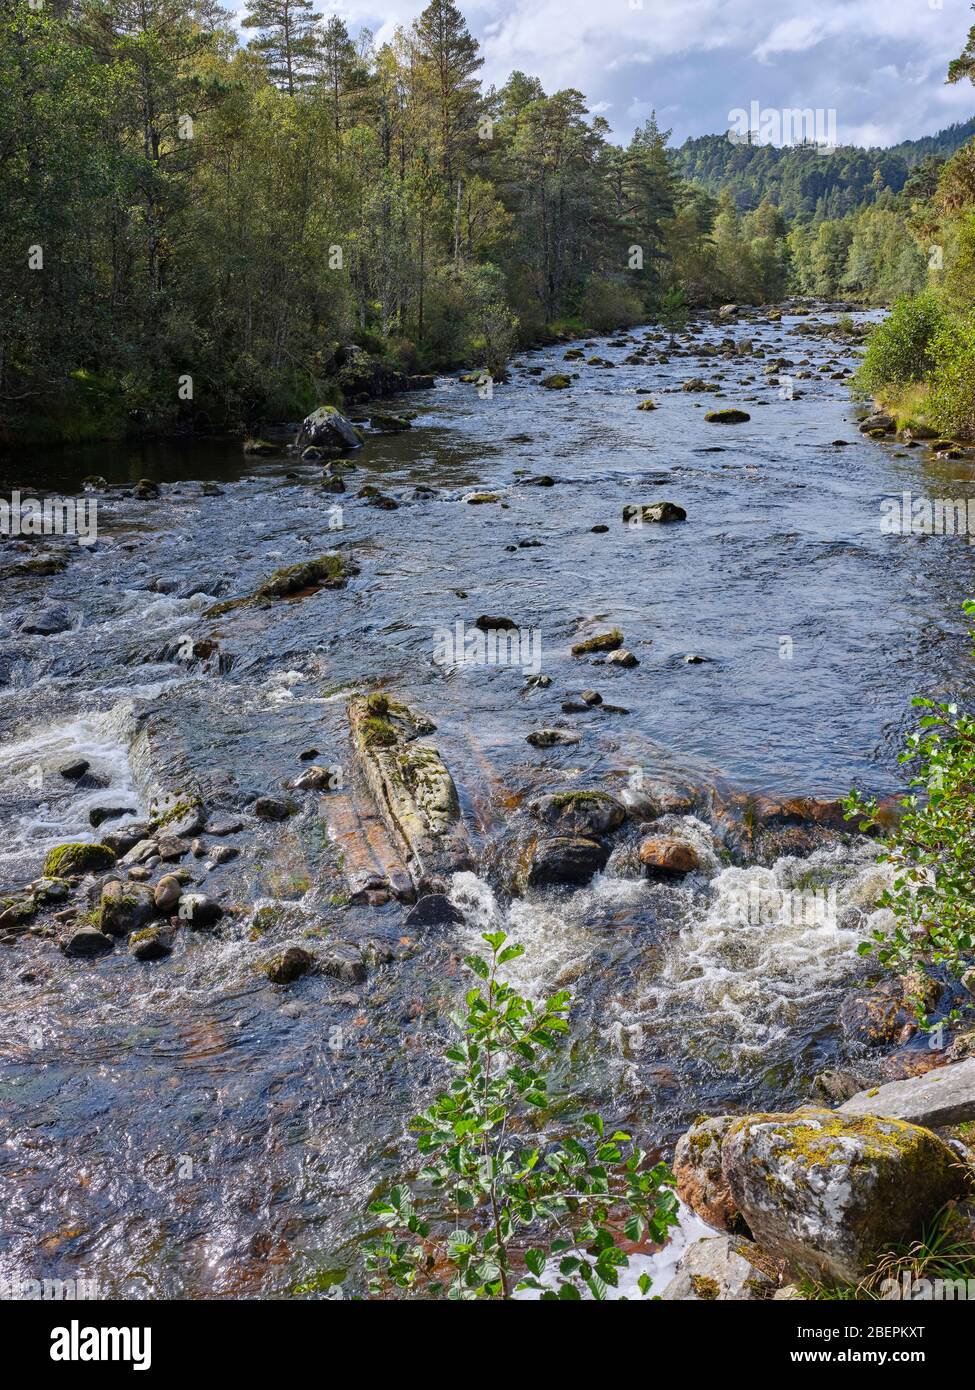 Glen Affric, Beauly, Inverness-Shire, Scotland, UK. 24/09/19. Upstream from the Bridge at Dog Falls in Glen Affric part of the Caledonian Forest Stock Photo